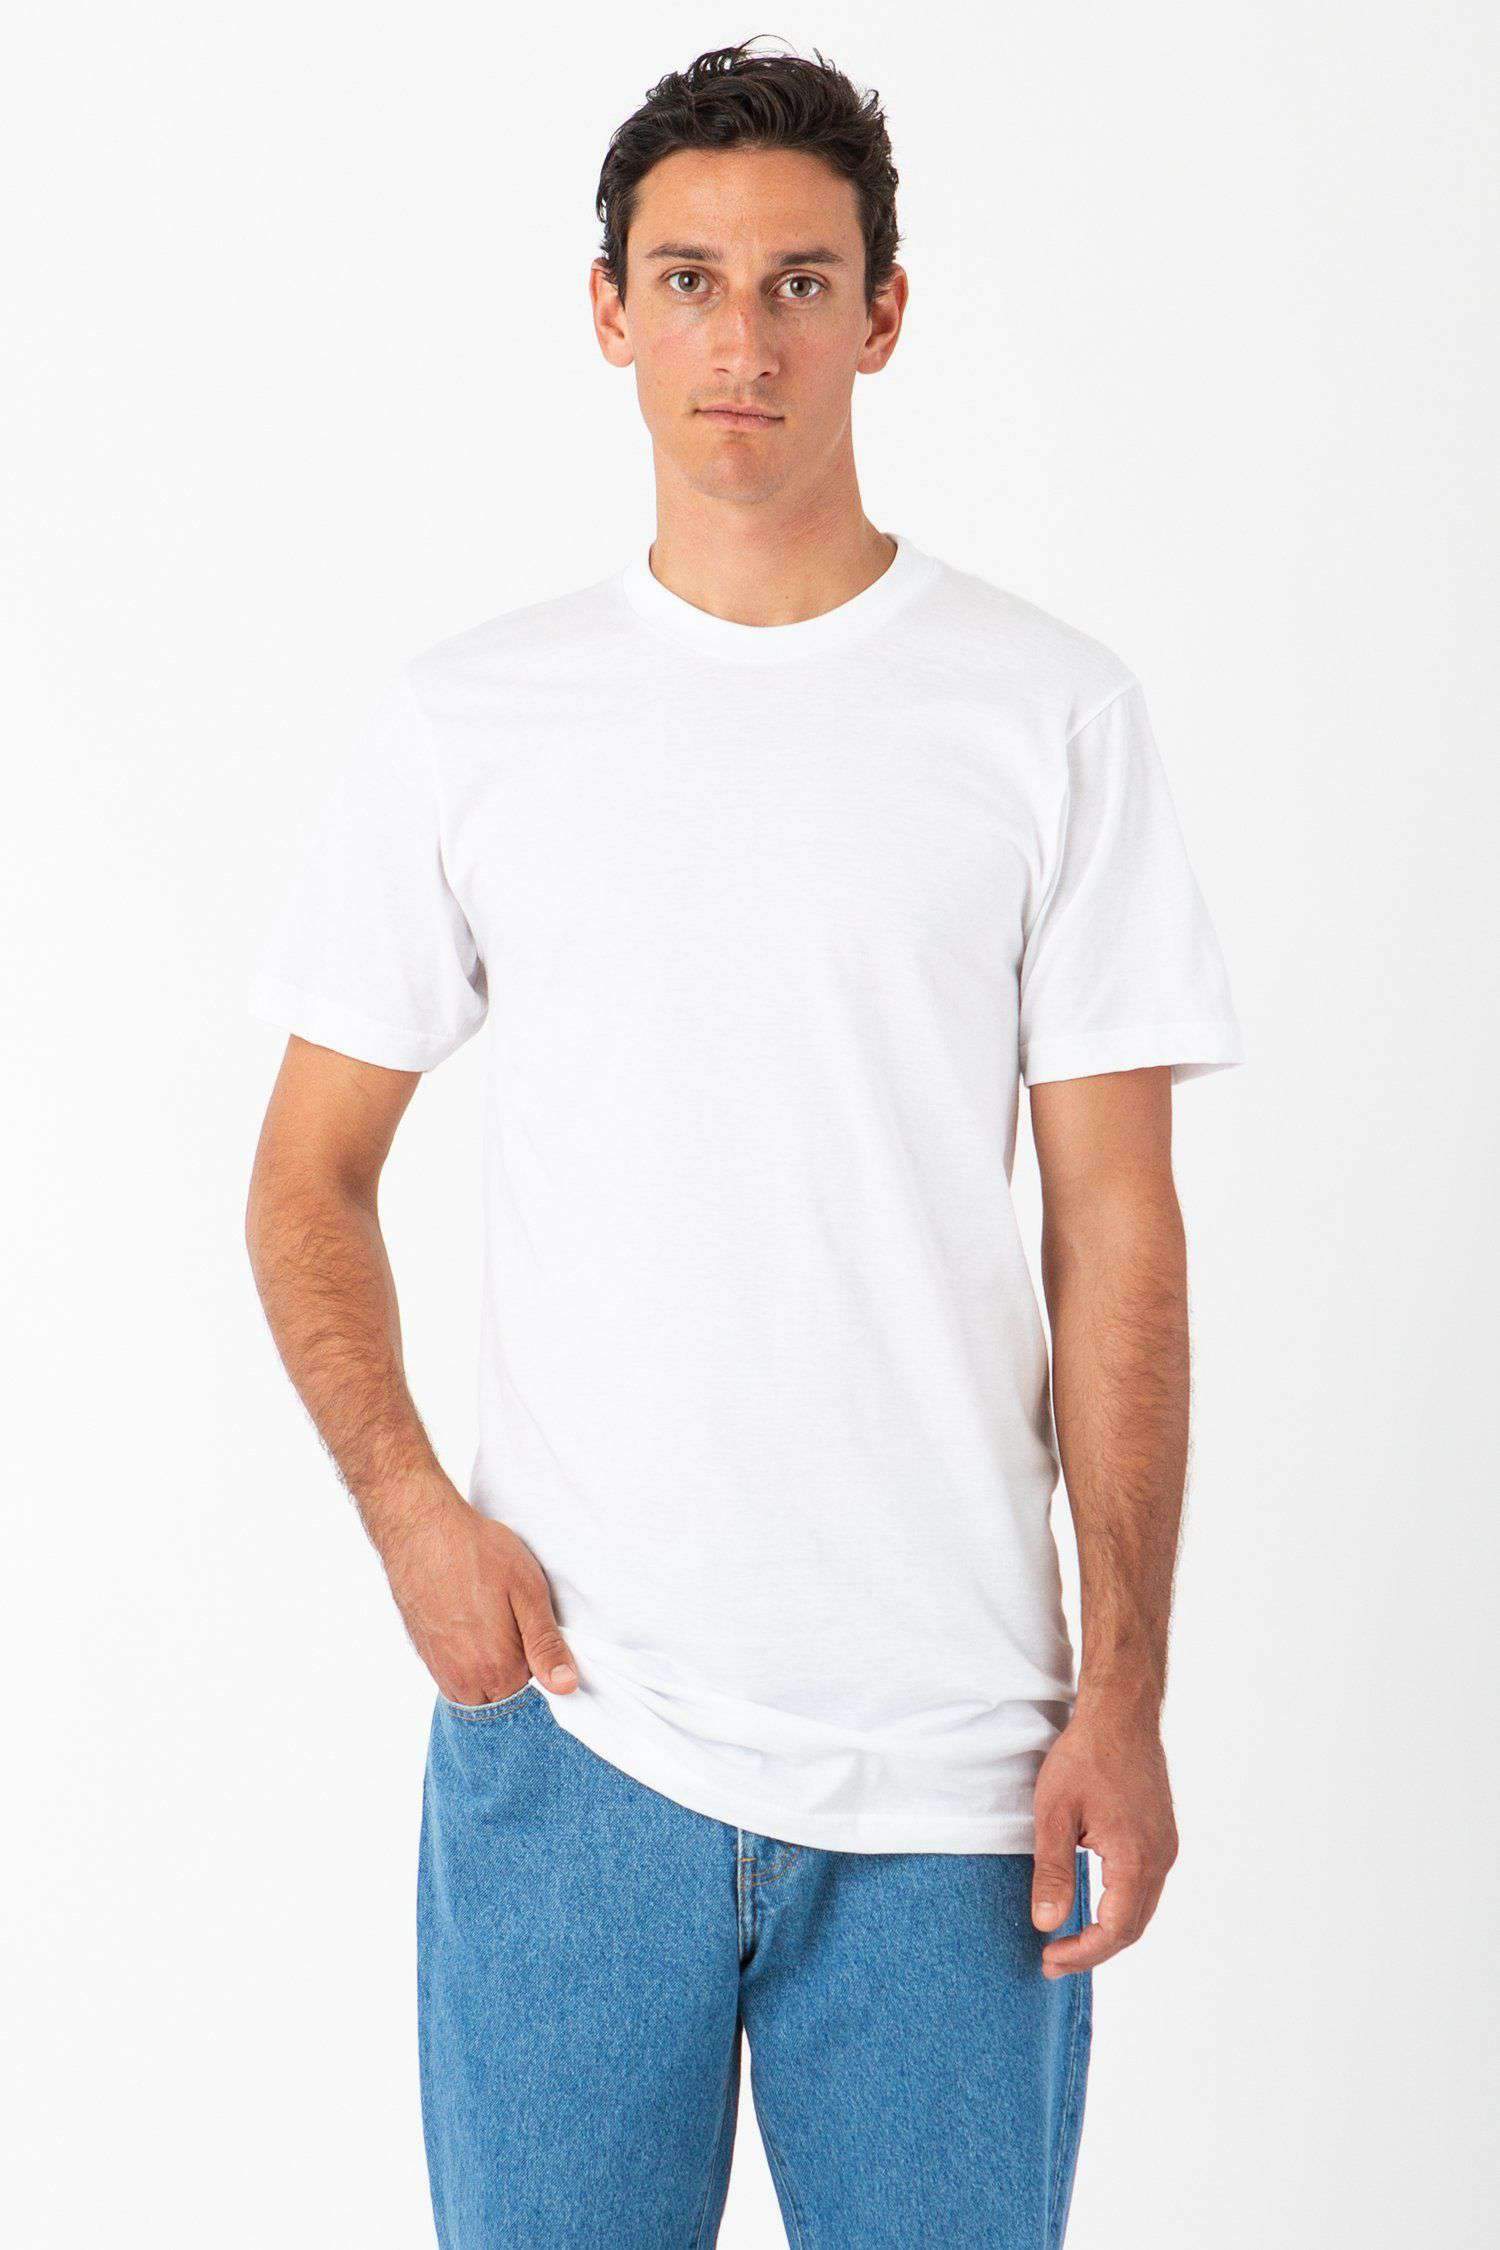 TL20001 - Fine Jersey Crew Neck Tall Tee T-Shirt Los Angeles Apparel White XS 